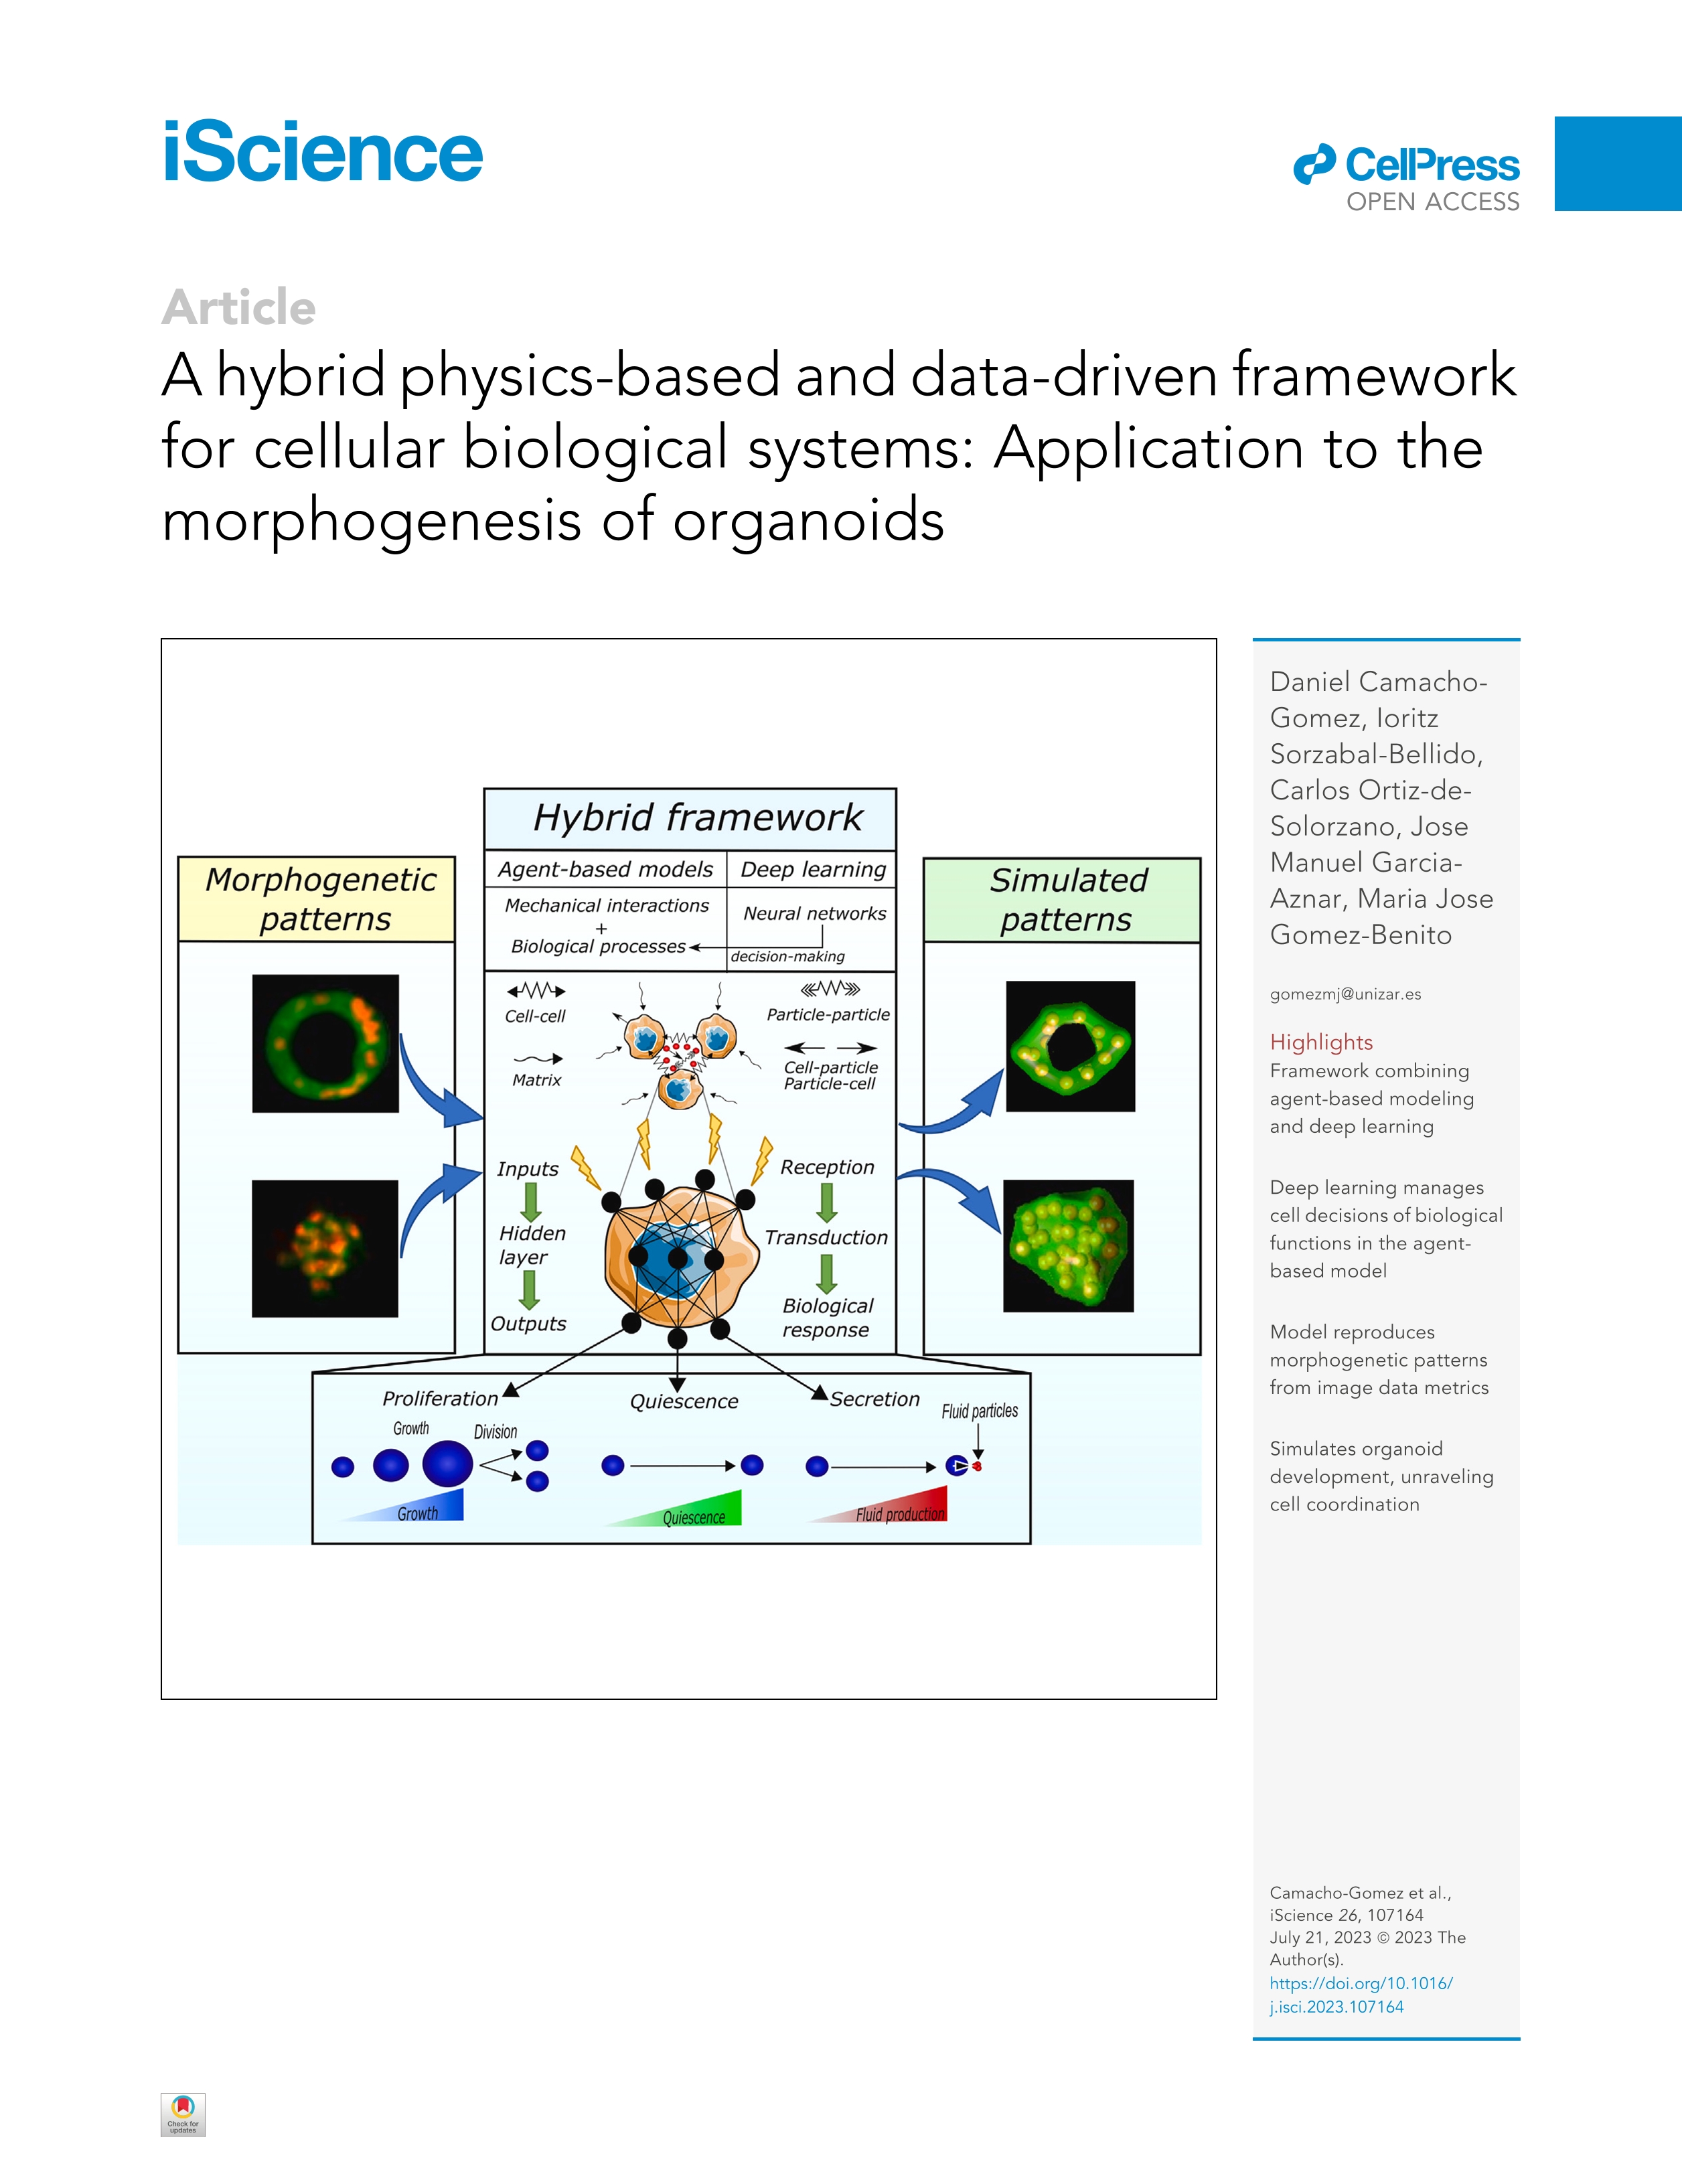 A hybrid physics-based and data-driven framework for cellular biological systems: Application to the morphogenesis of organoids